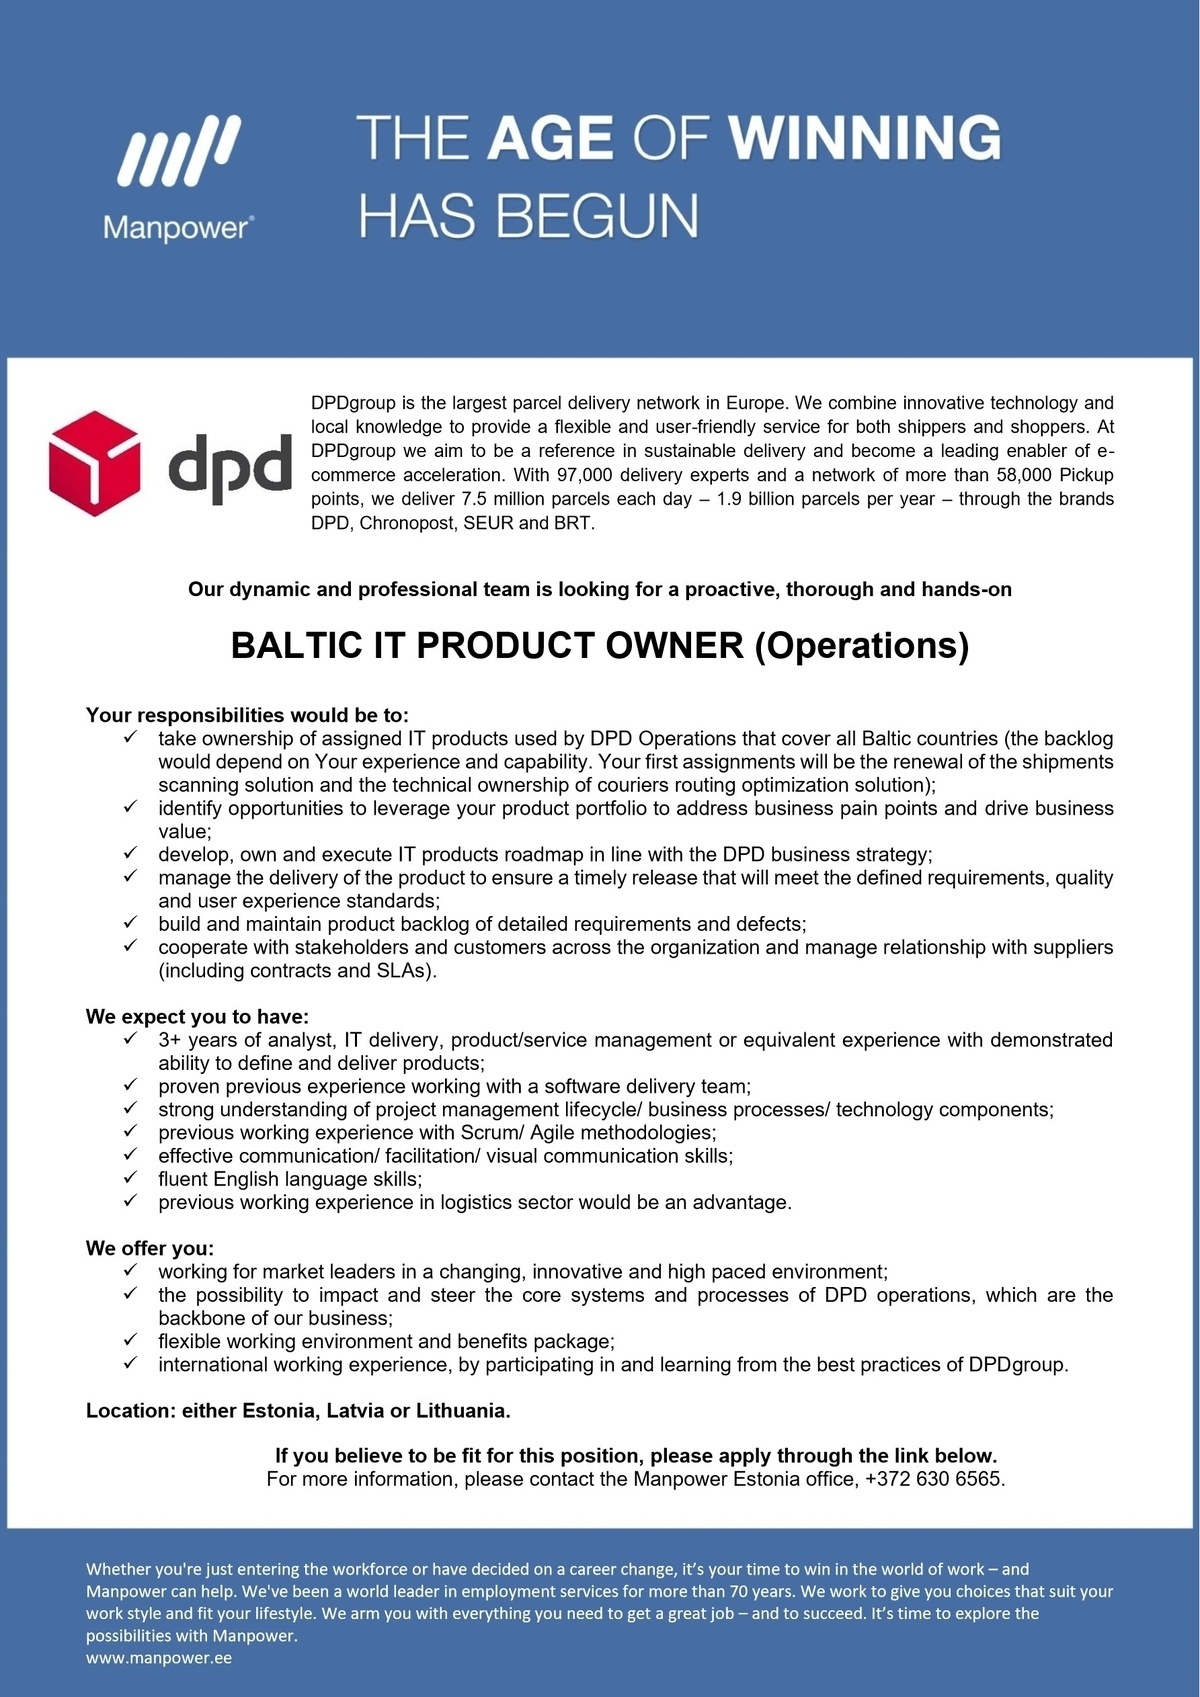 Manpower OÜ BALTIC IT PRODUCT OWNER (Operations)